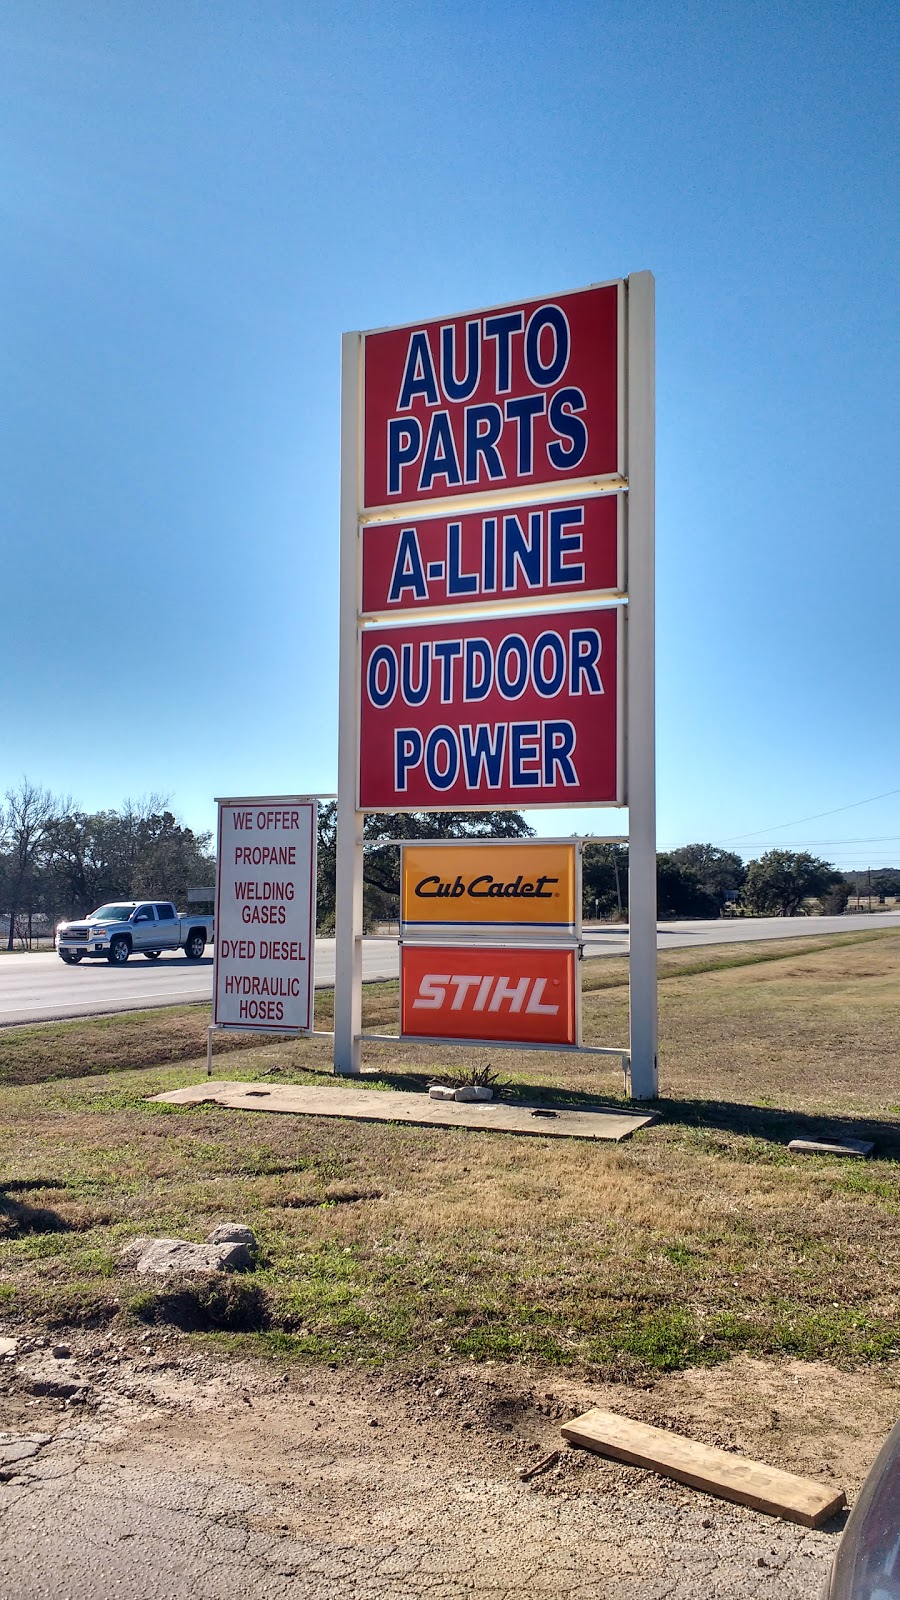 A-Line Auto Parts | 2200 US-290, Dripping Springs, TX 78620, USA | Phone: (512) 894-0037